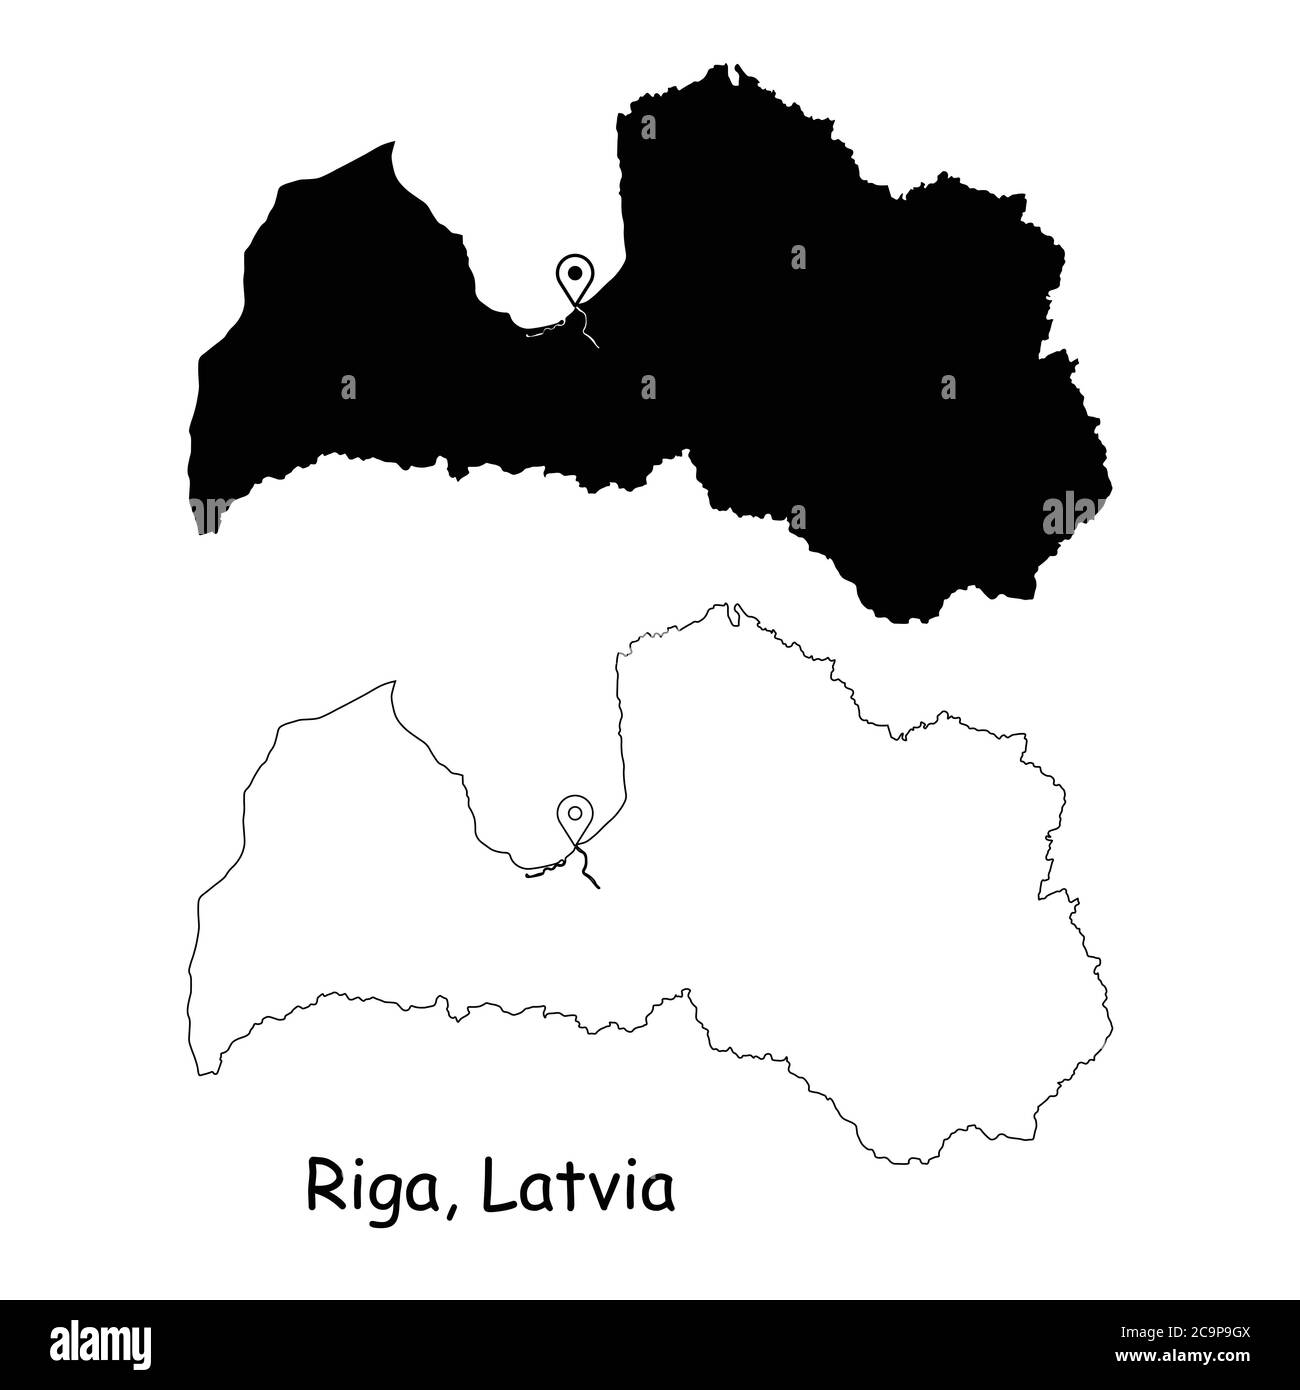 Riga Latvia. Detailed Country Map with Location Pin on Capital City. Black silhouette and outline maps isolated on white background. EPS Vector Stock Vector